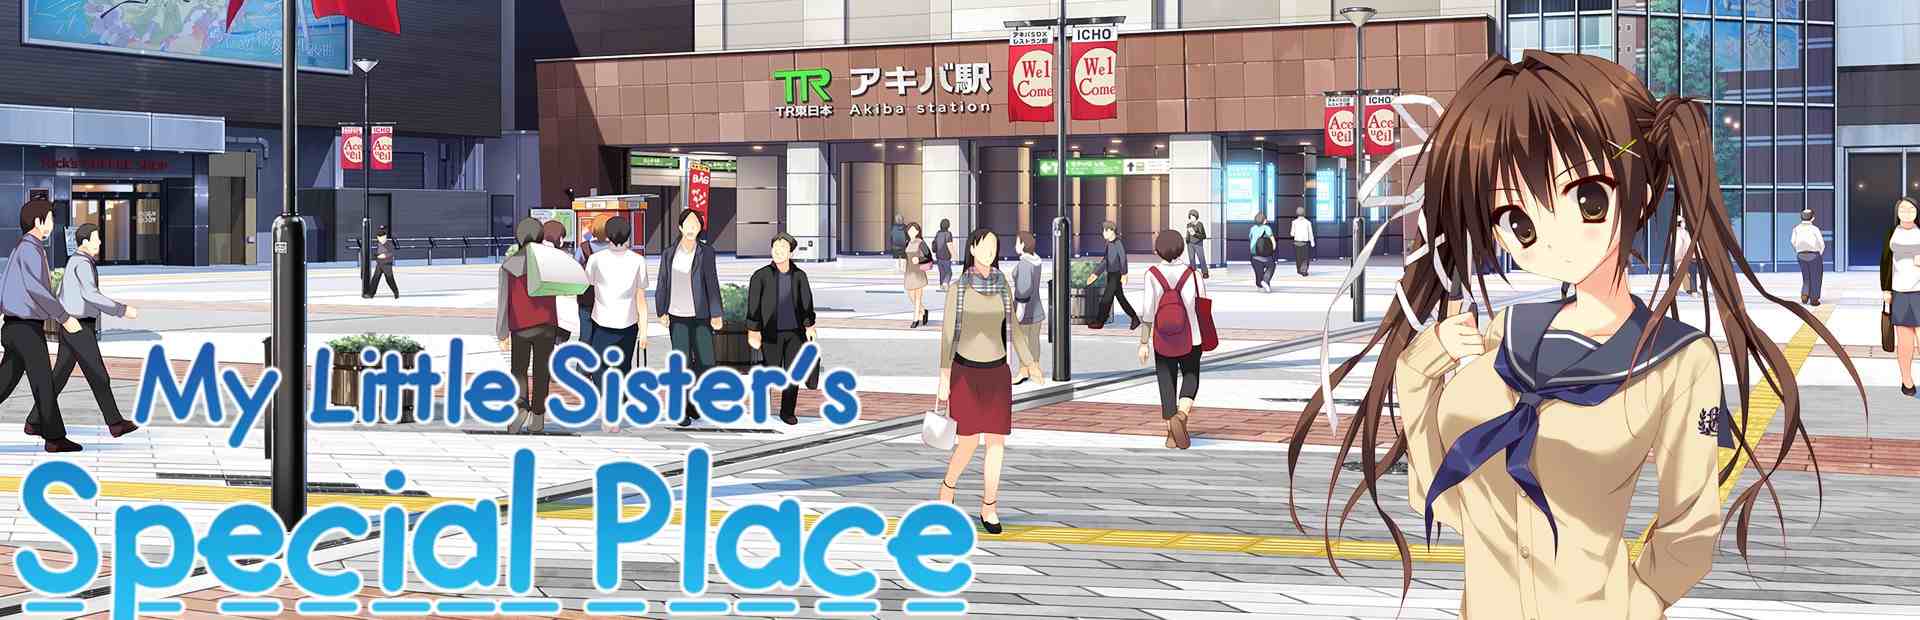 My Little Sister’s Special Place [Feng] Adult xxx Game Download